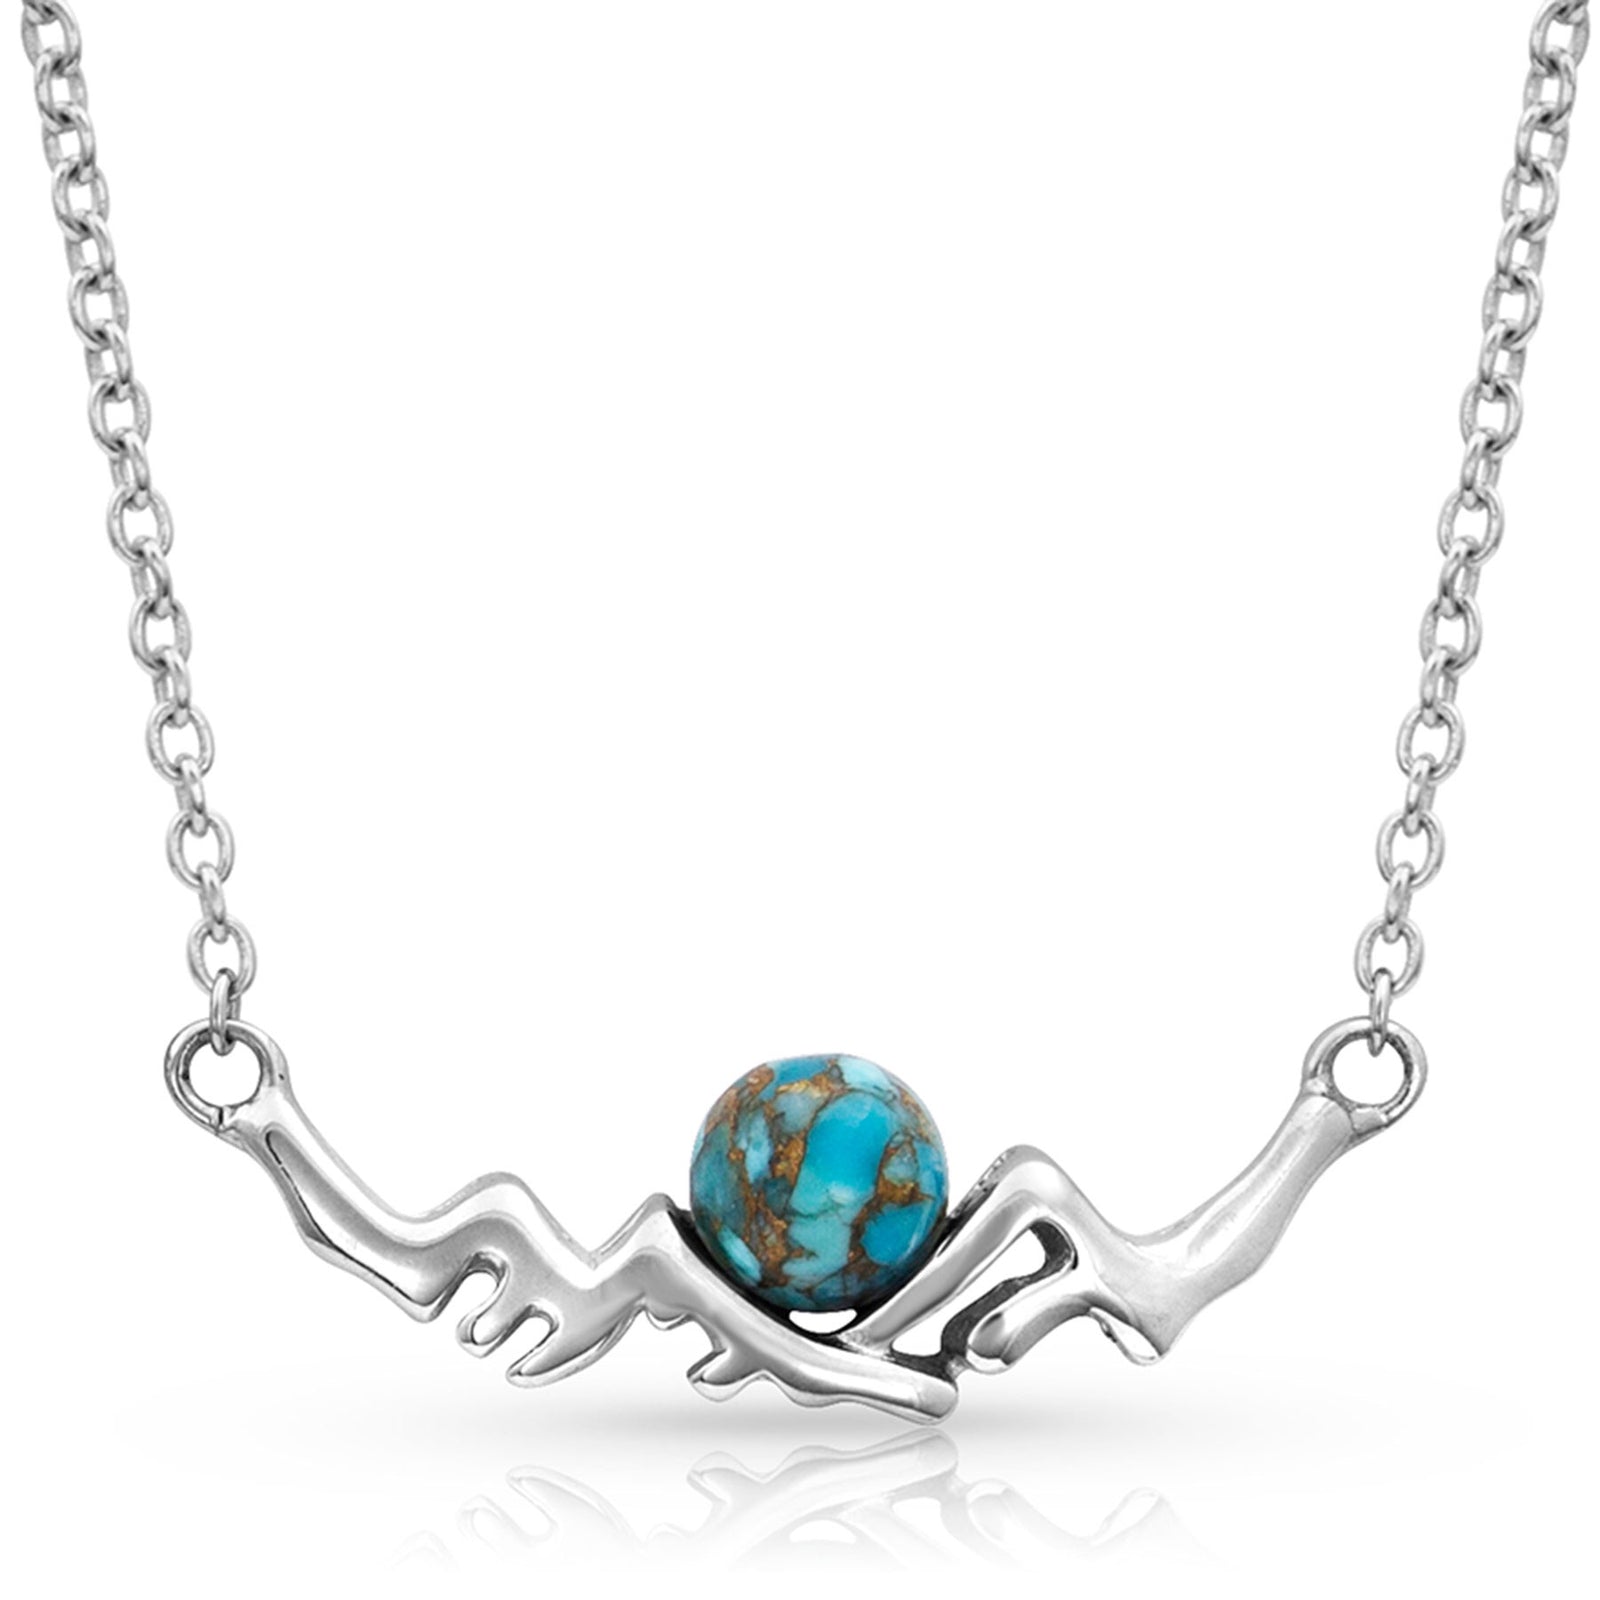 Pursue the Wild Mountain Turquoise Necklace